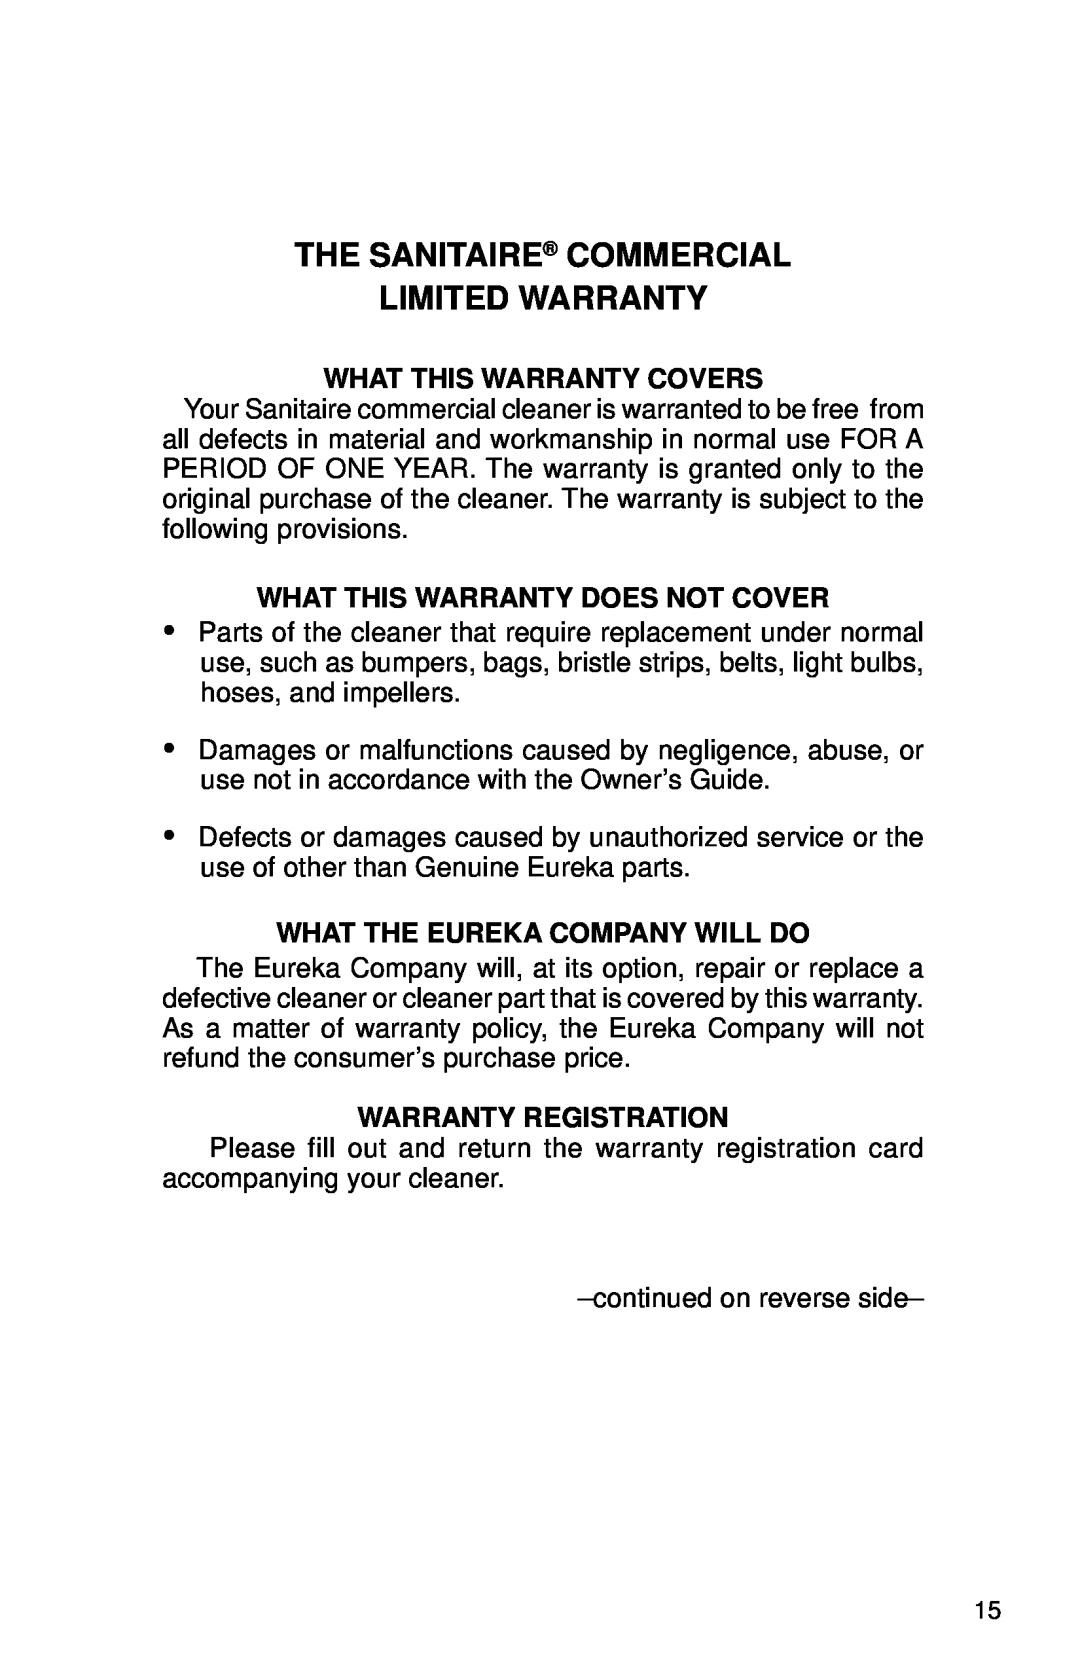 Sanitaire SC785 SERIES warranty The Sanitaire Commercial Limited Warranty, What This Warranty Covers, Warranty Registration 